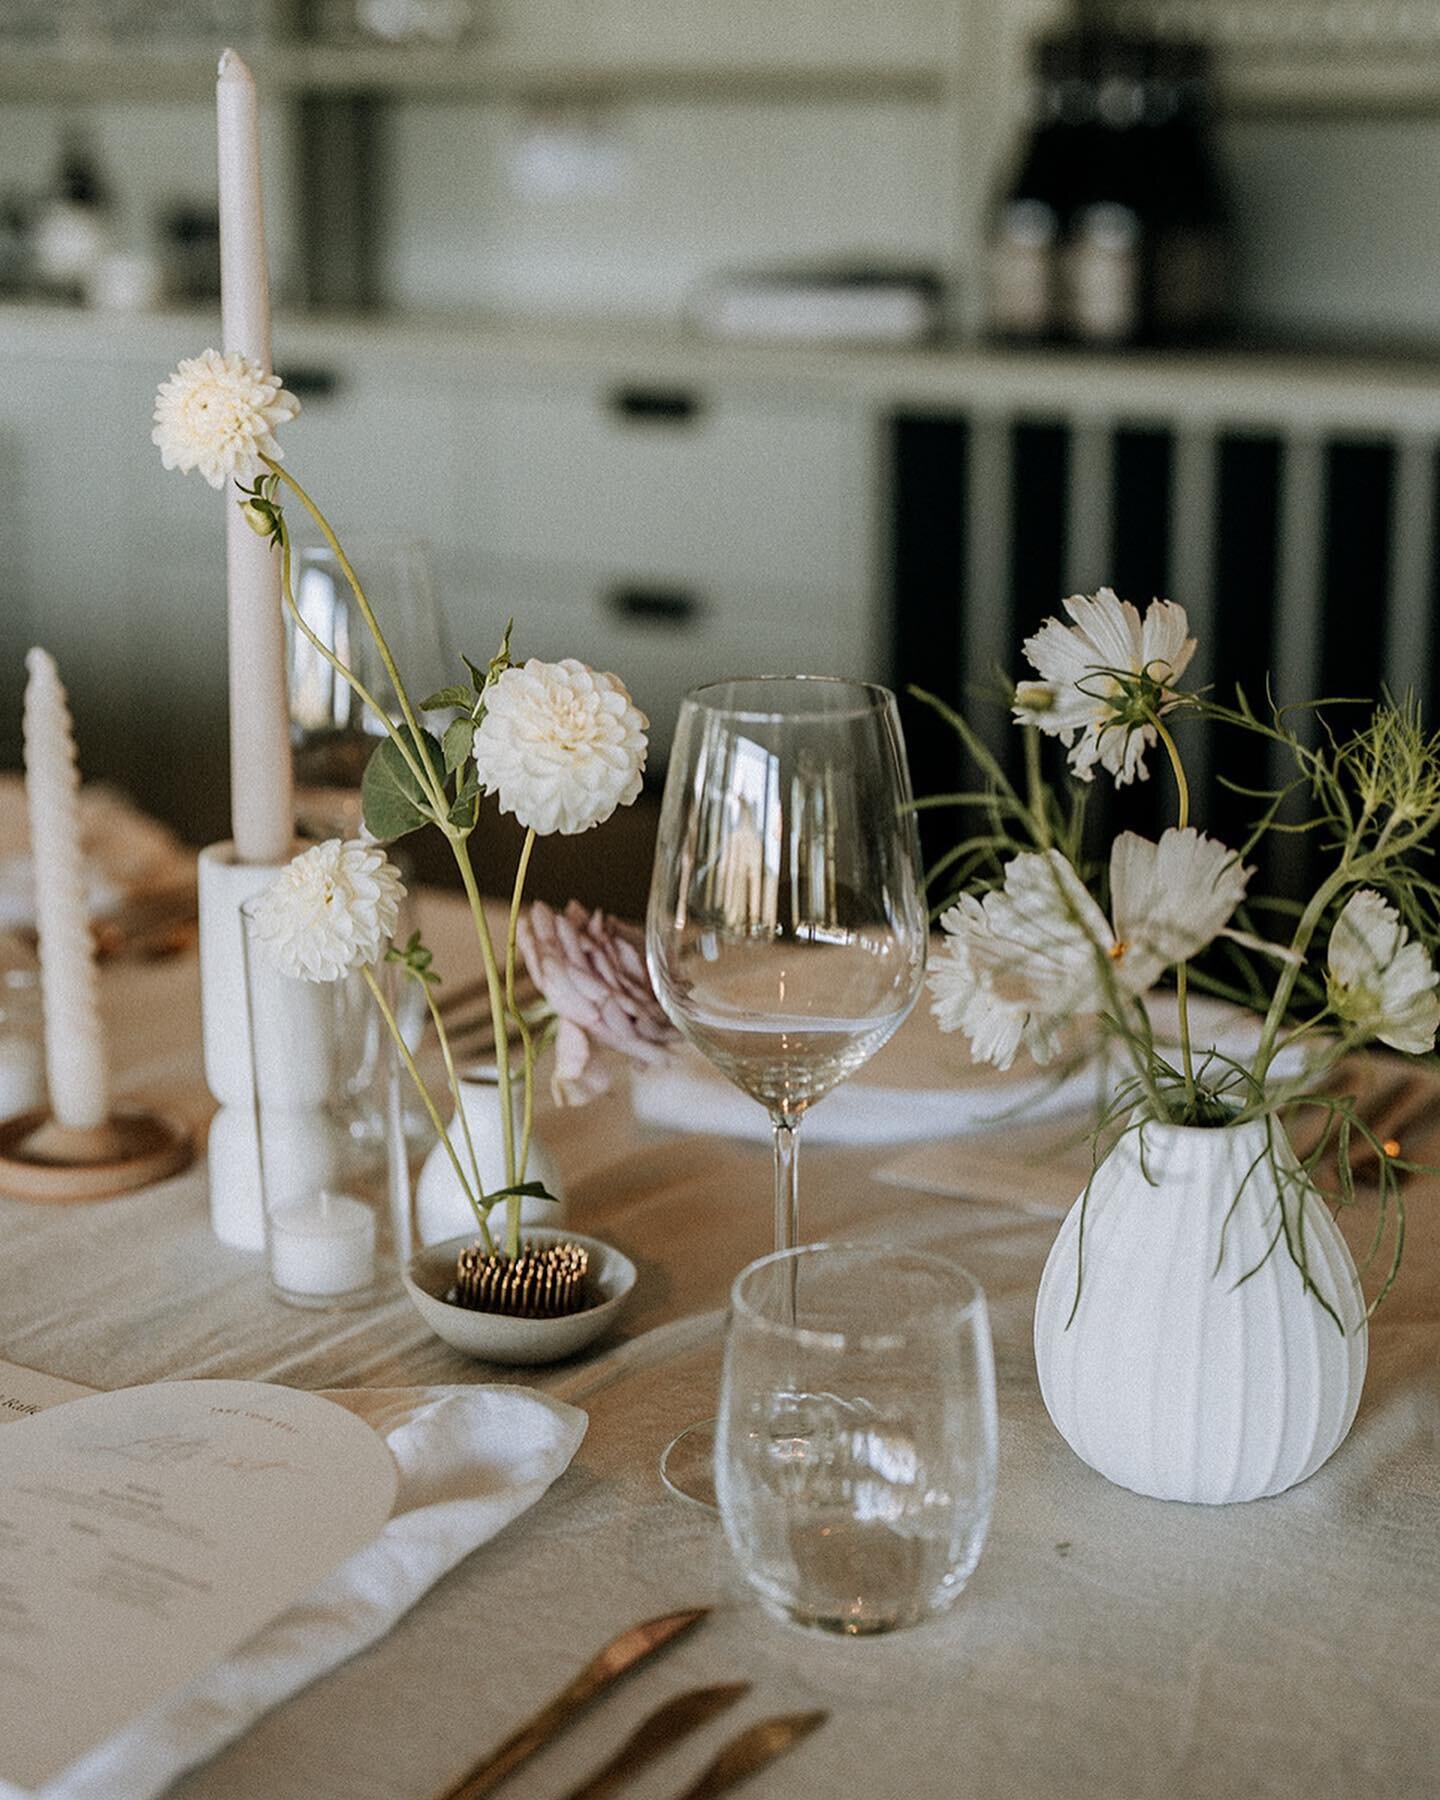 Details for Steph &amp; Simon captured beautifully by @meredithlord / style &amp; design by Flock. Tap for team x